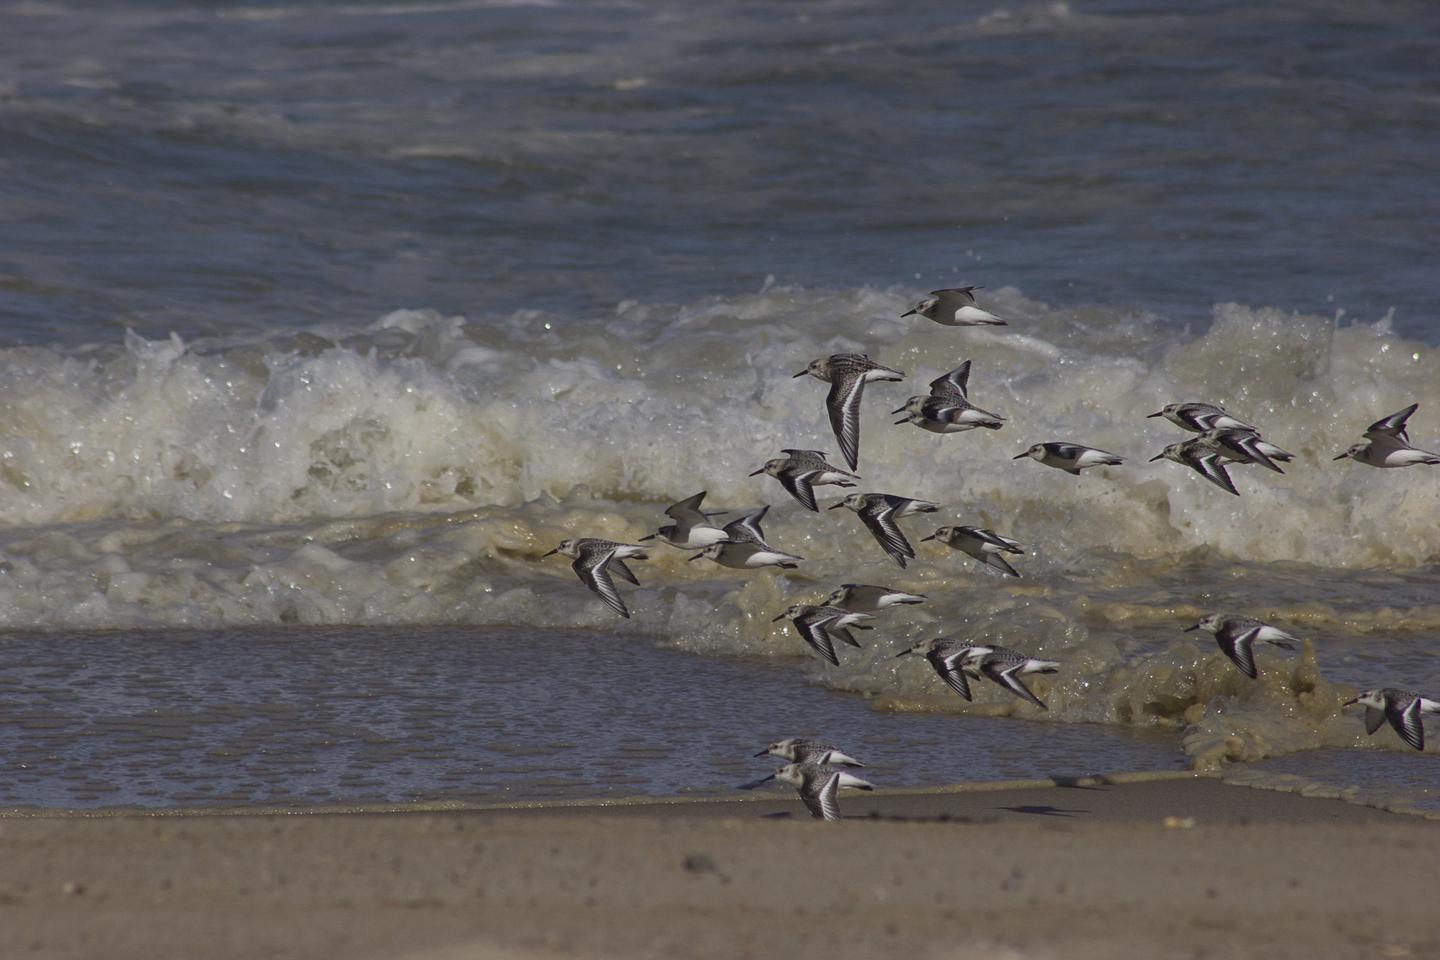 Birds and BeachThe national seashore is known for its species diversity, including threatened and endangered shorebirds.